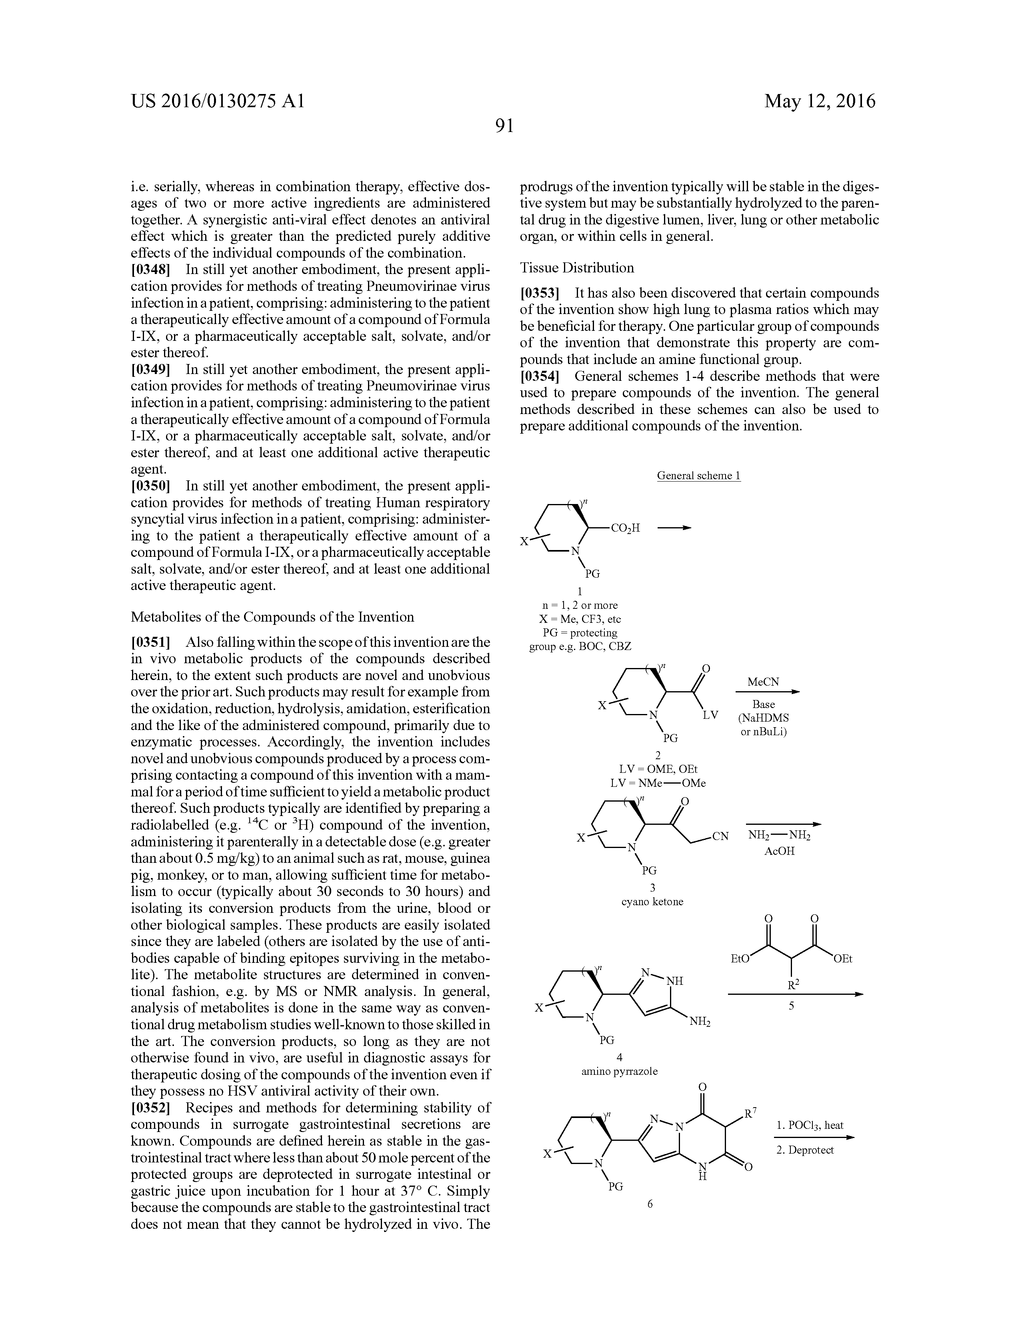 PYRAZOLO[1,5-A]PYRIMIDINES FOR ANTIVIRAL TREATMENT - diagram, schematic, and image 92